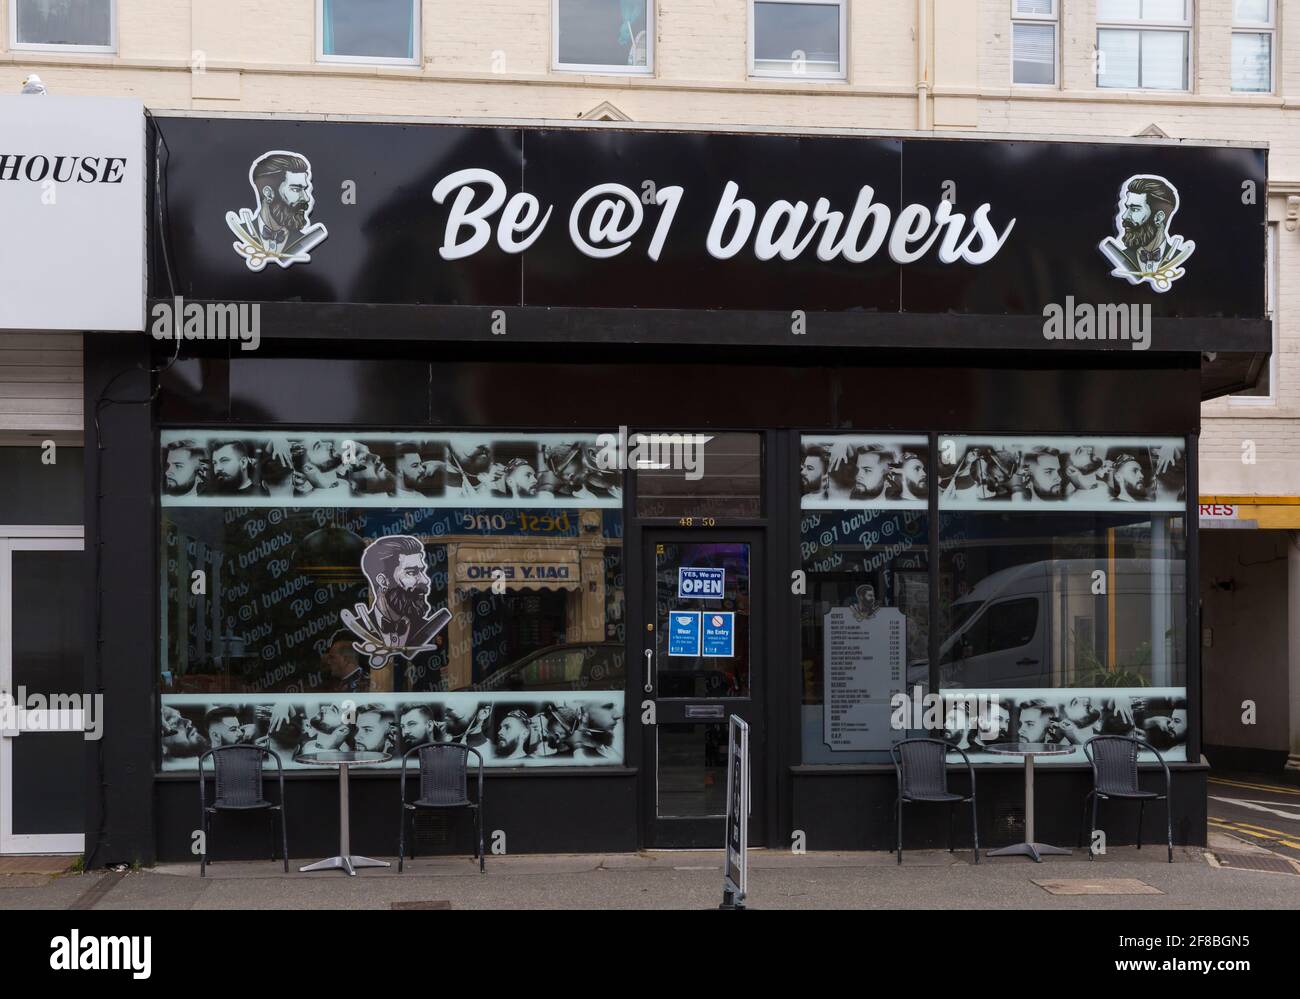 Be @1 barbers reopens as Covid-19 lockdown restrictions ease, Bournemouth, Dorset UK in April Stock Photo